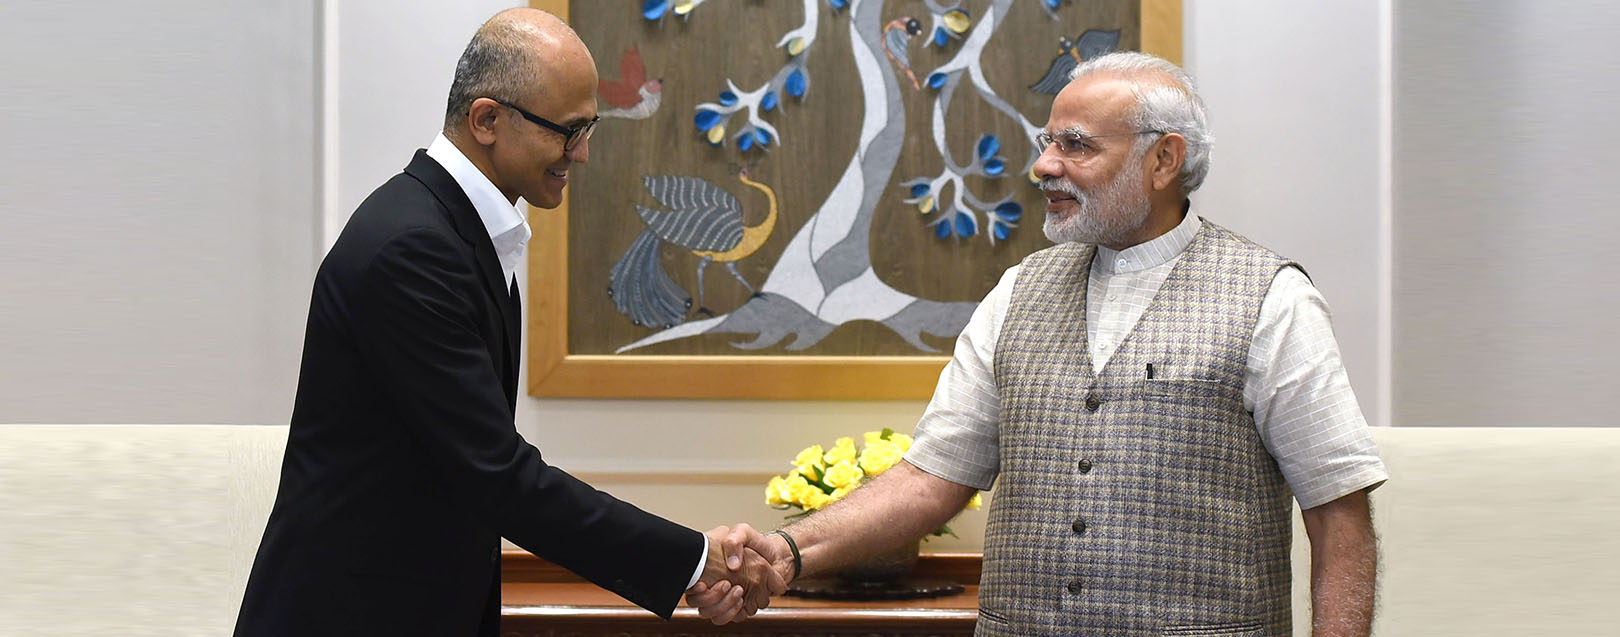 Nadella pitches Microsoft's digital initiatives for Rural India